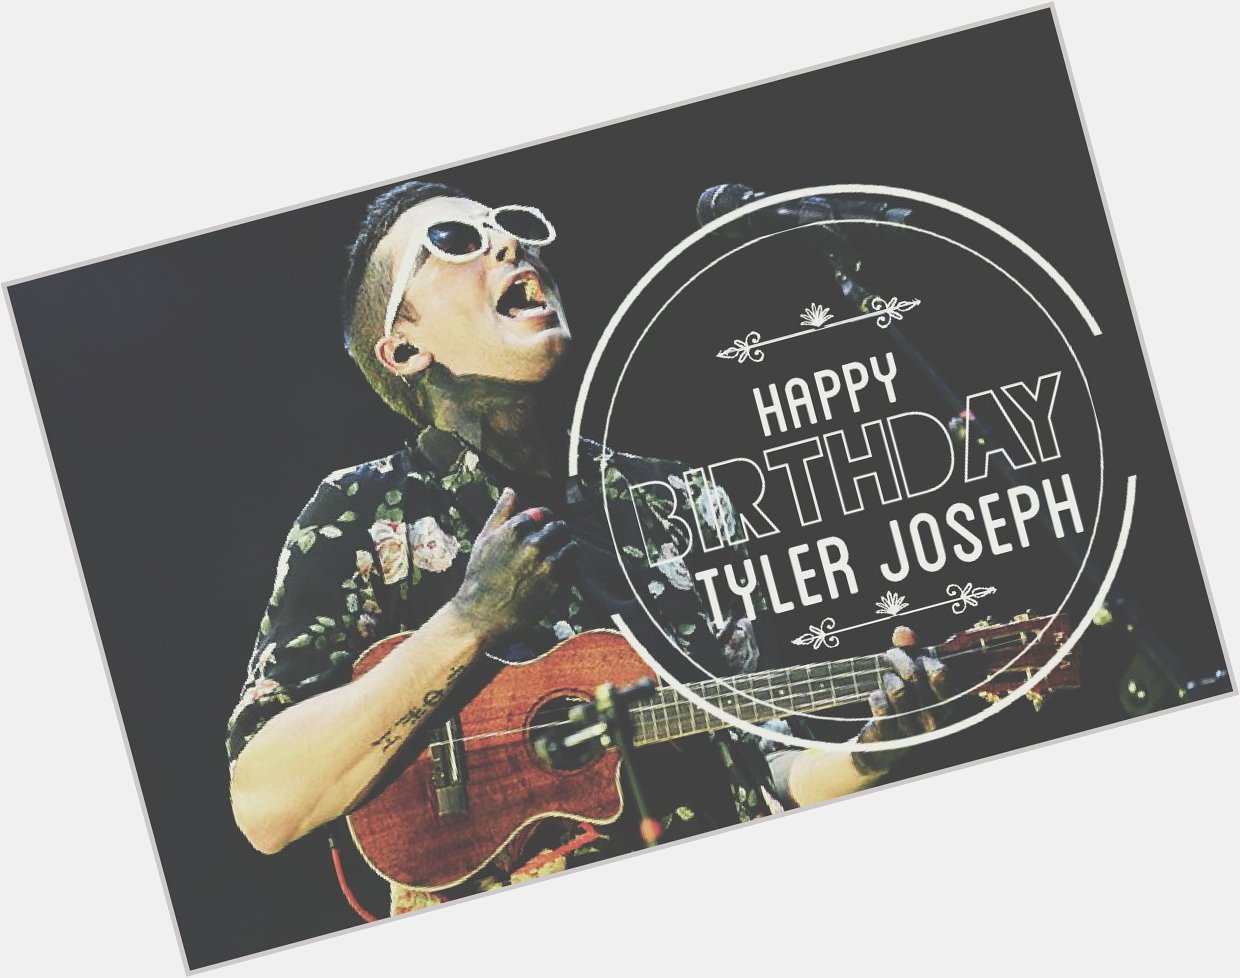 Happy 27th Birthday Tyler Joseph.
Thank you for being you and here\s to another year of living, have a good one. 